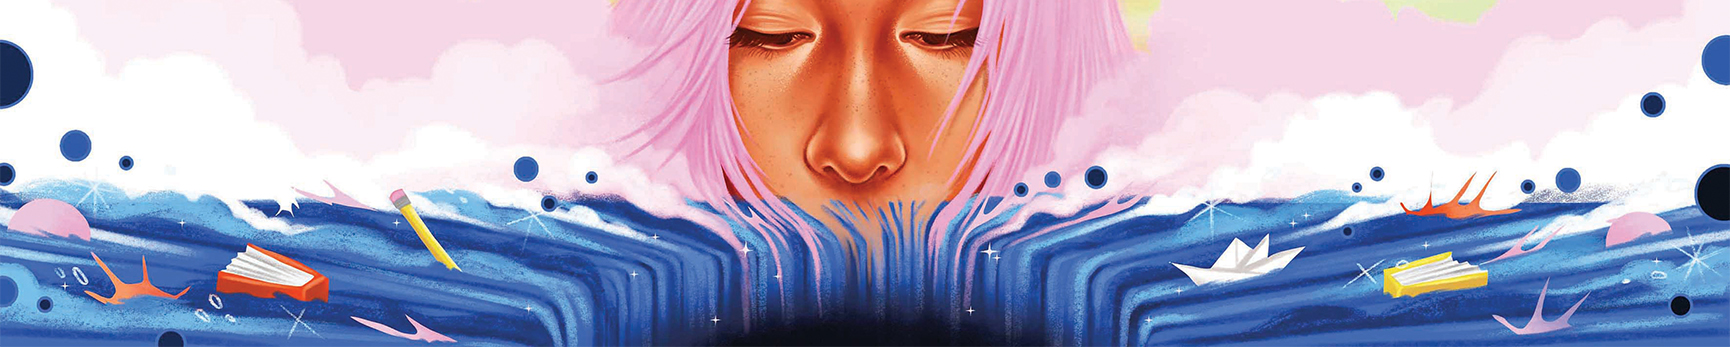 Young girl with pink hair melting into the deep blue sea – books, pencils, paper hats and molecule-like shapes, pastel pink clouds float on the water